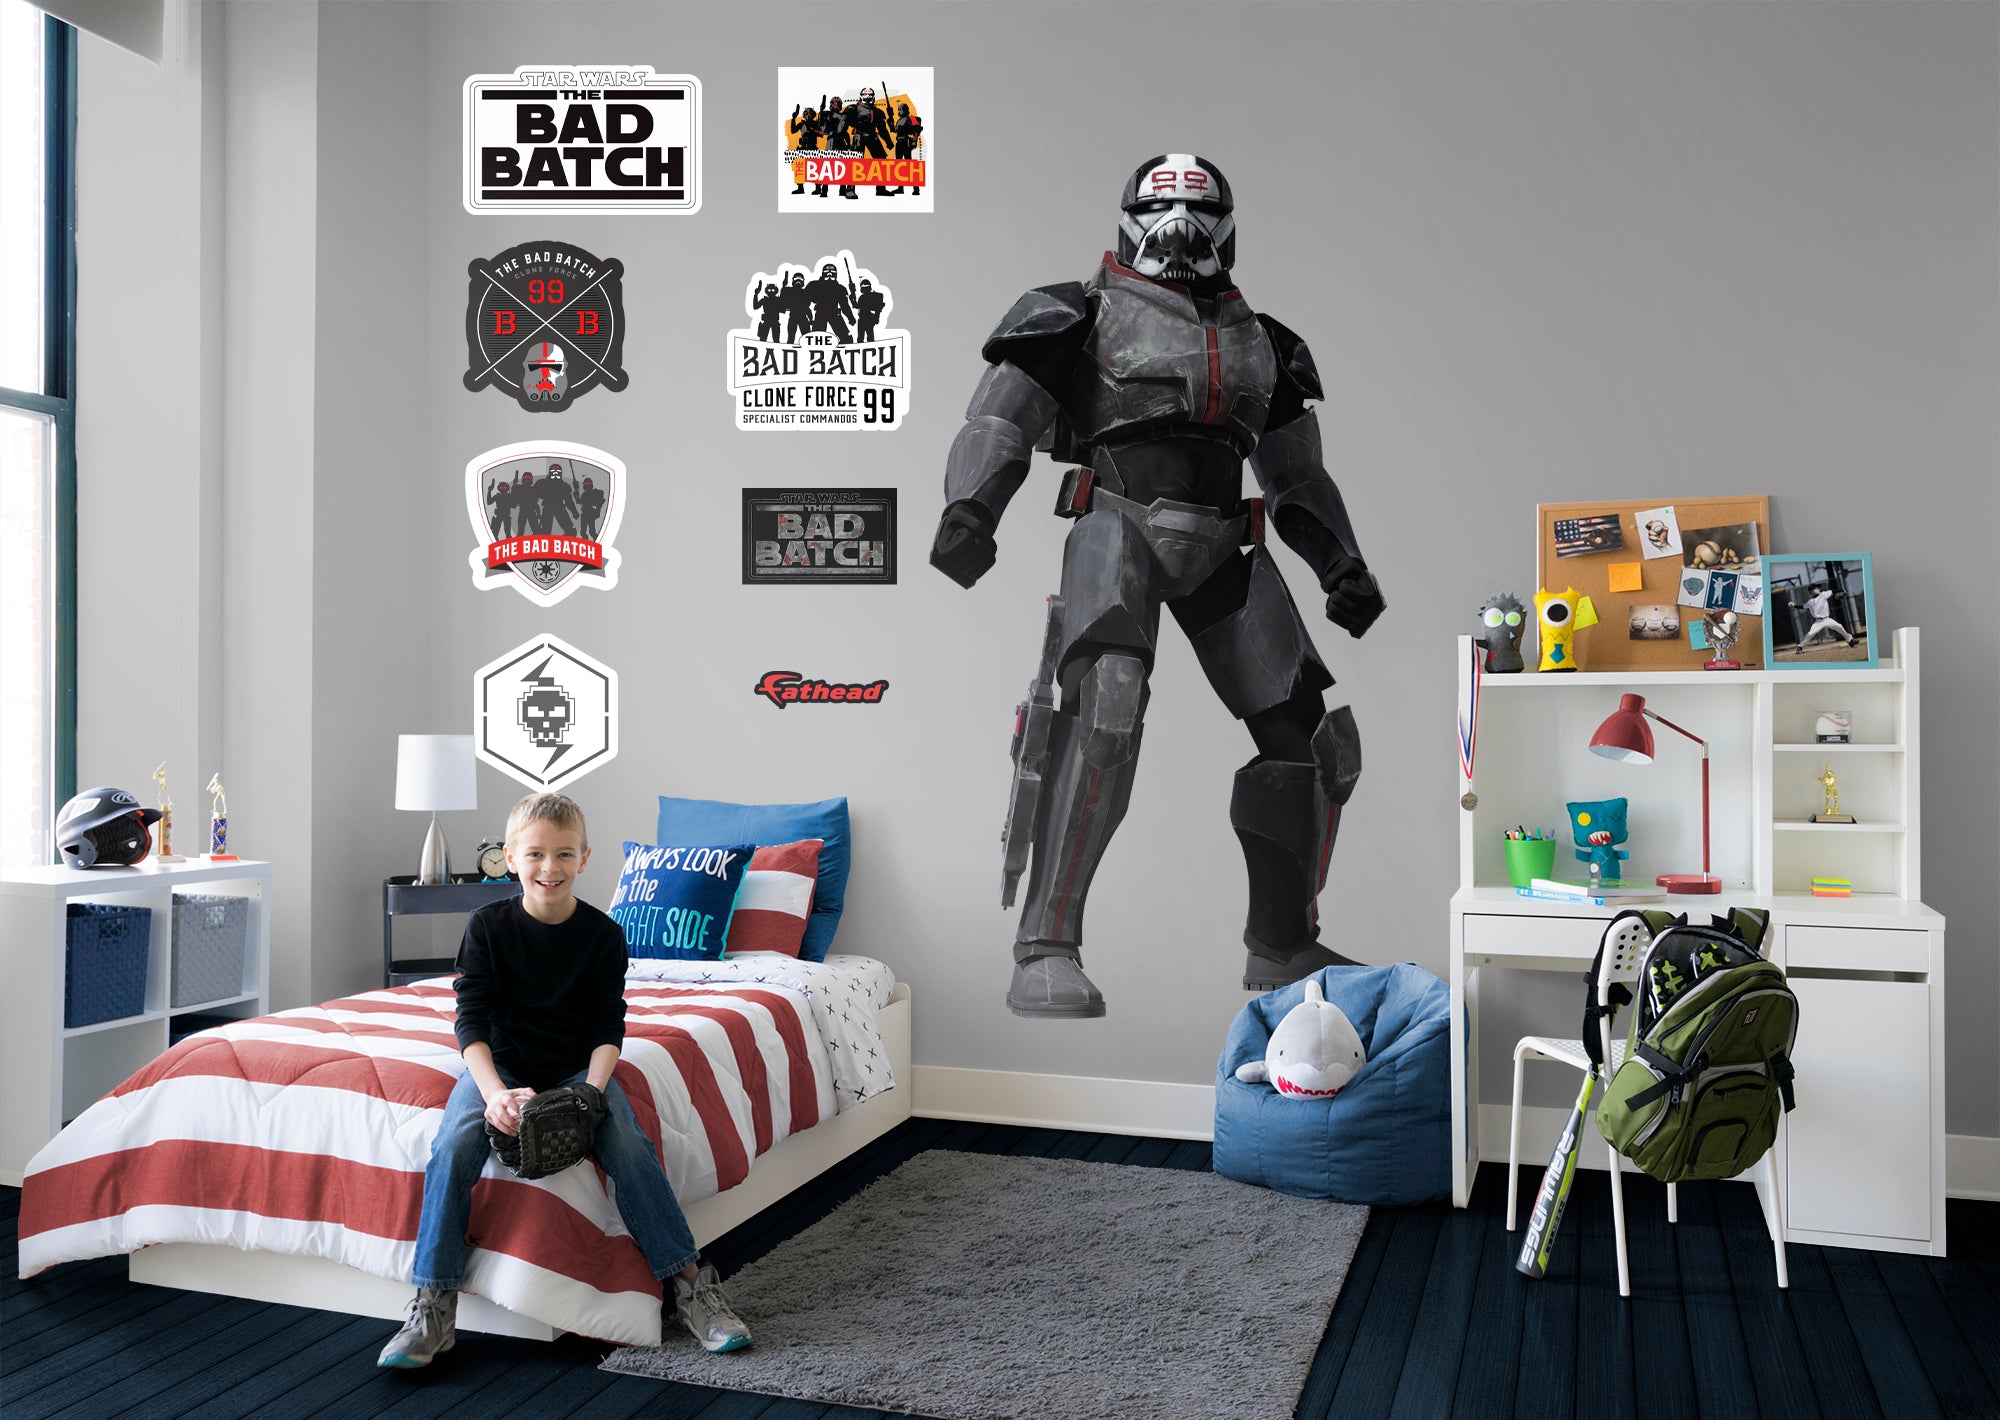 Bad Batch Wrecker - Officially Licensed Star Wars Removable Wall Decal Giant Character + 2 Decals by Fathead | Vinyl